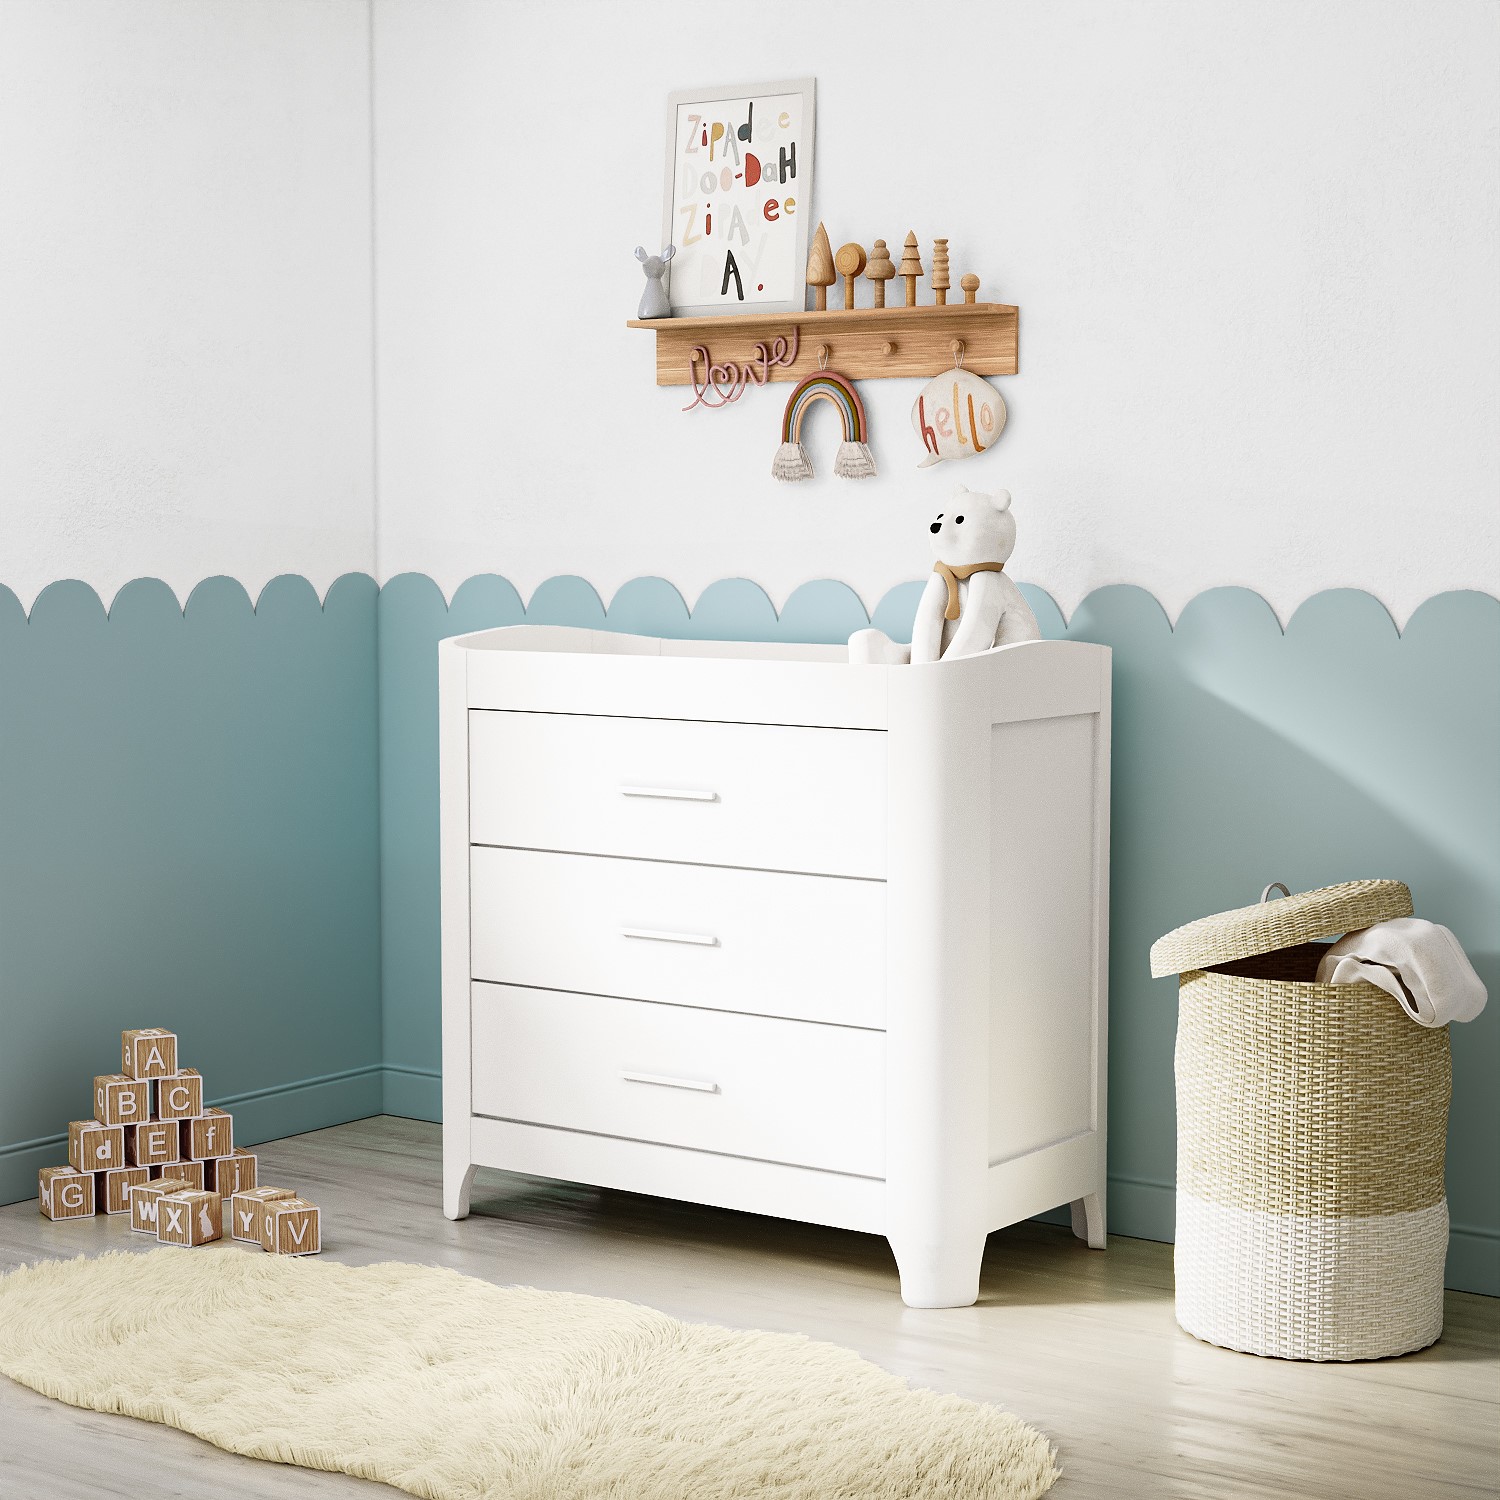 Read more about White pine wood changing unit with 3 drawers and curved edges shiloh